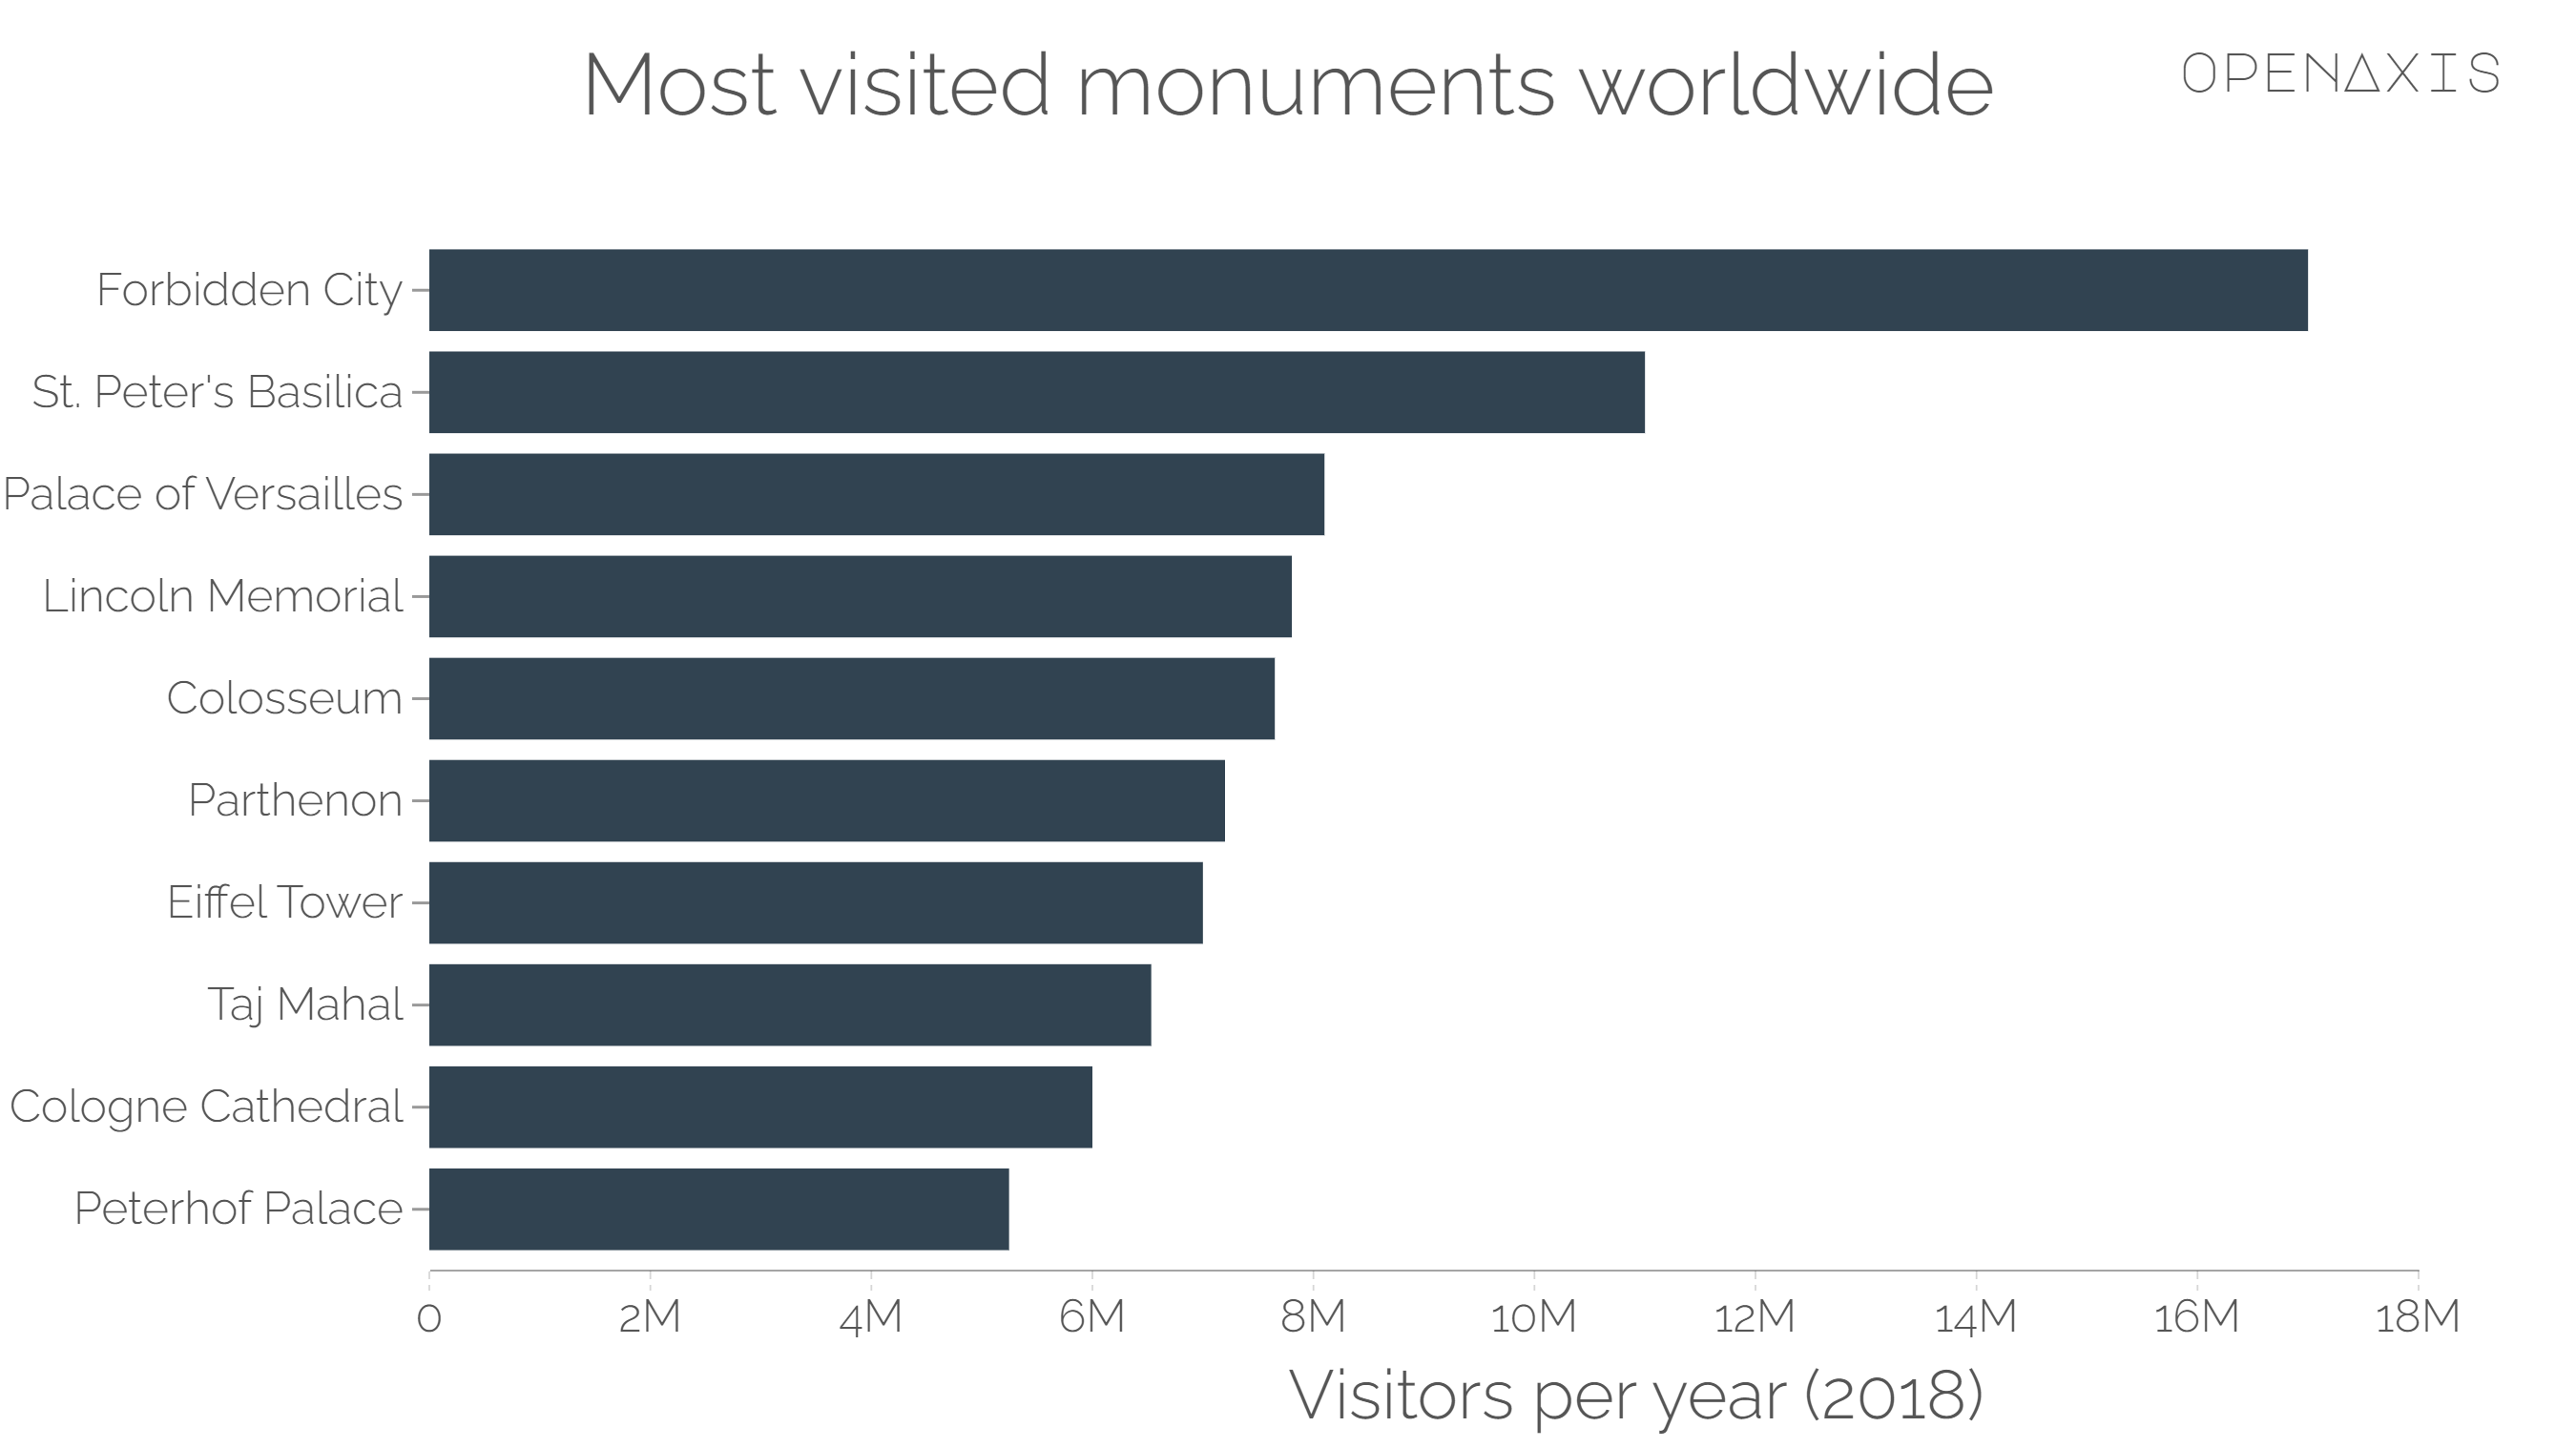 "Most visited monuments worldwide"